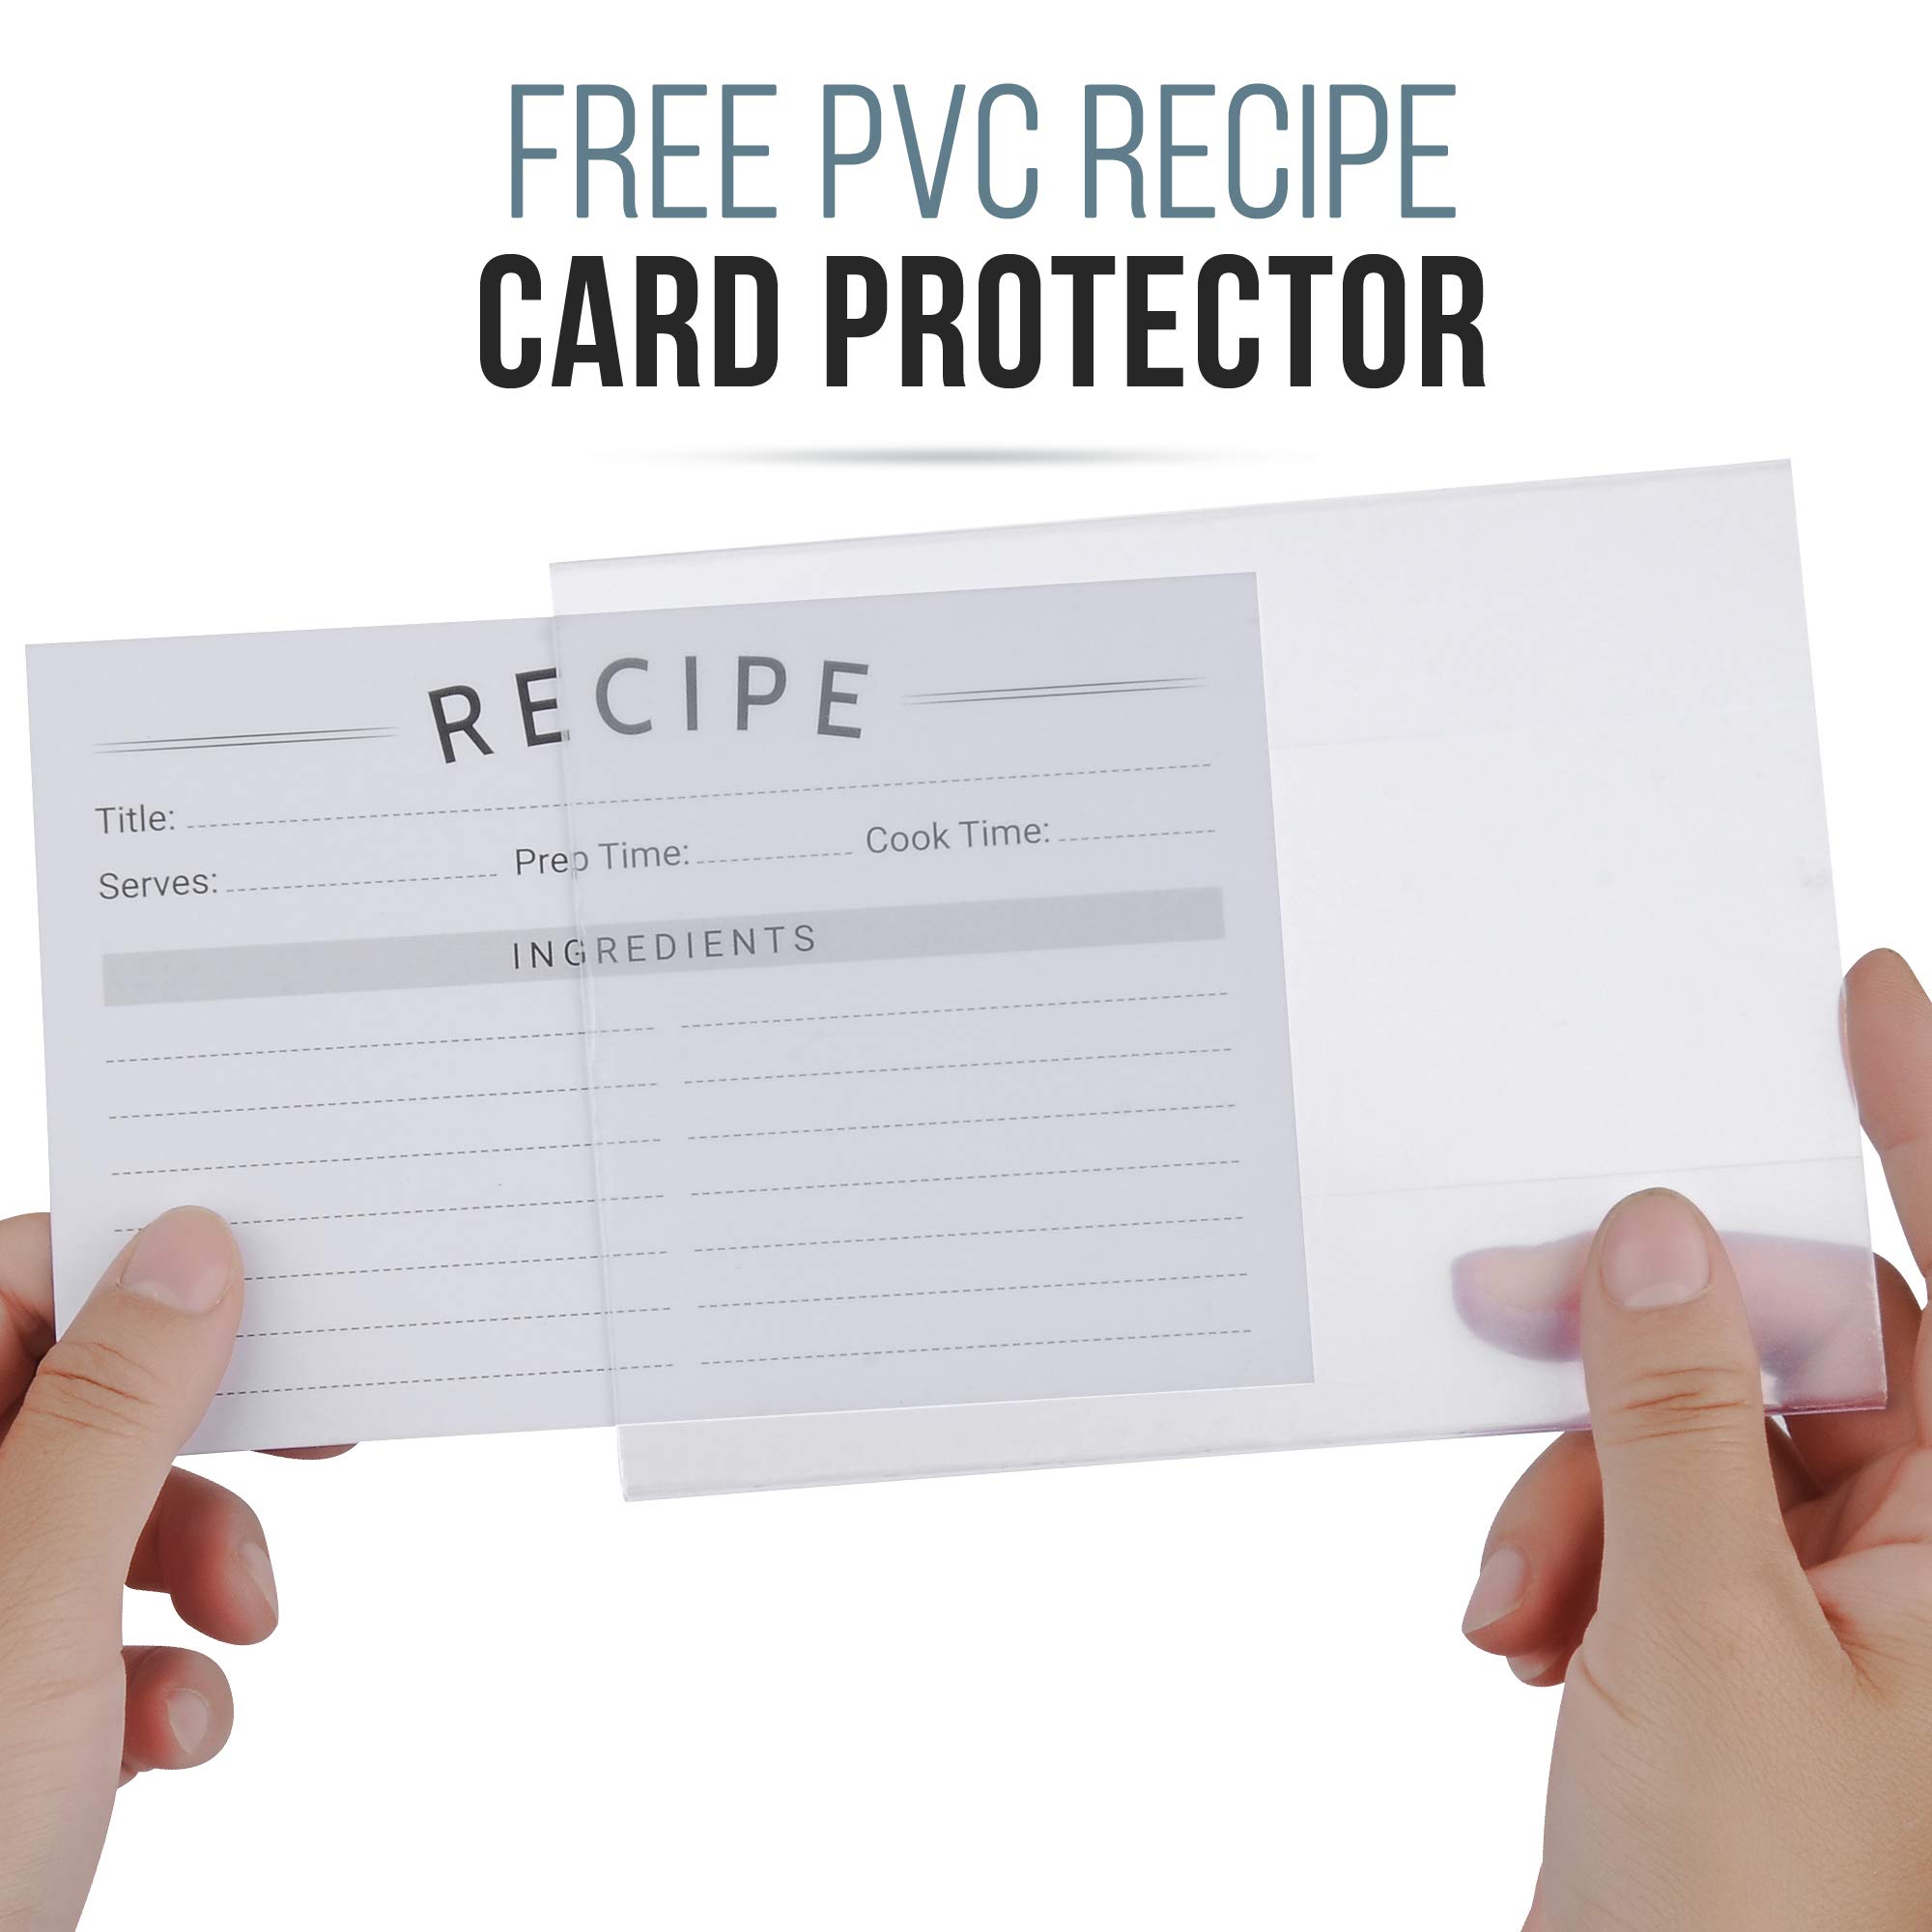 Modern Recipe Cards (Set of 60) - 4x6” Double Sided Premium Thick Card Stock w/Bonus Measuring Chart and PVC Card Protector (4 x 6 inches)